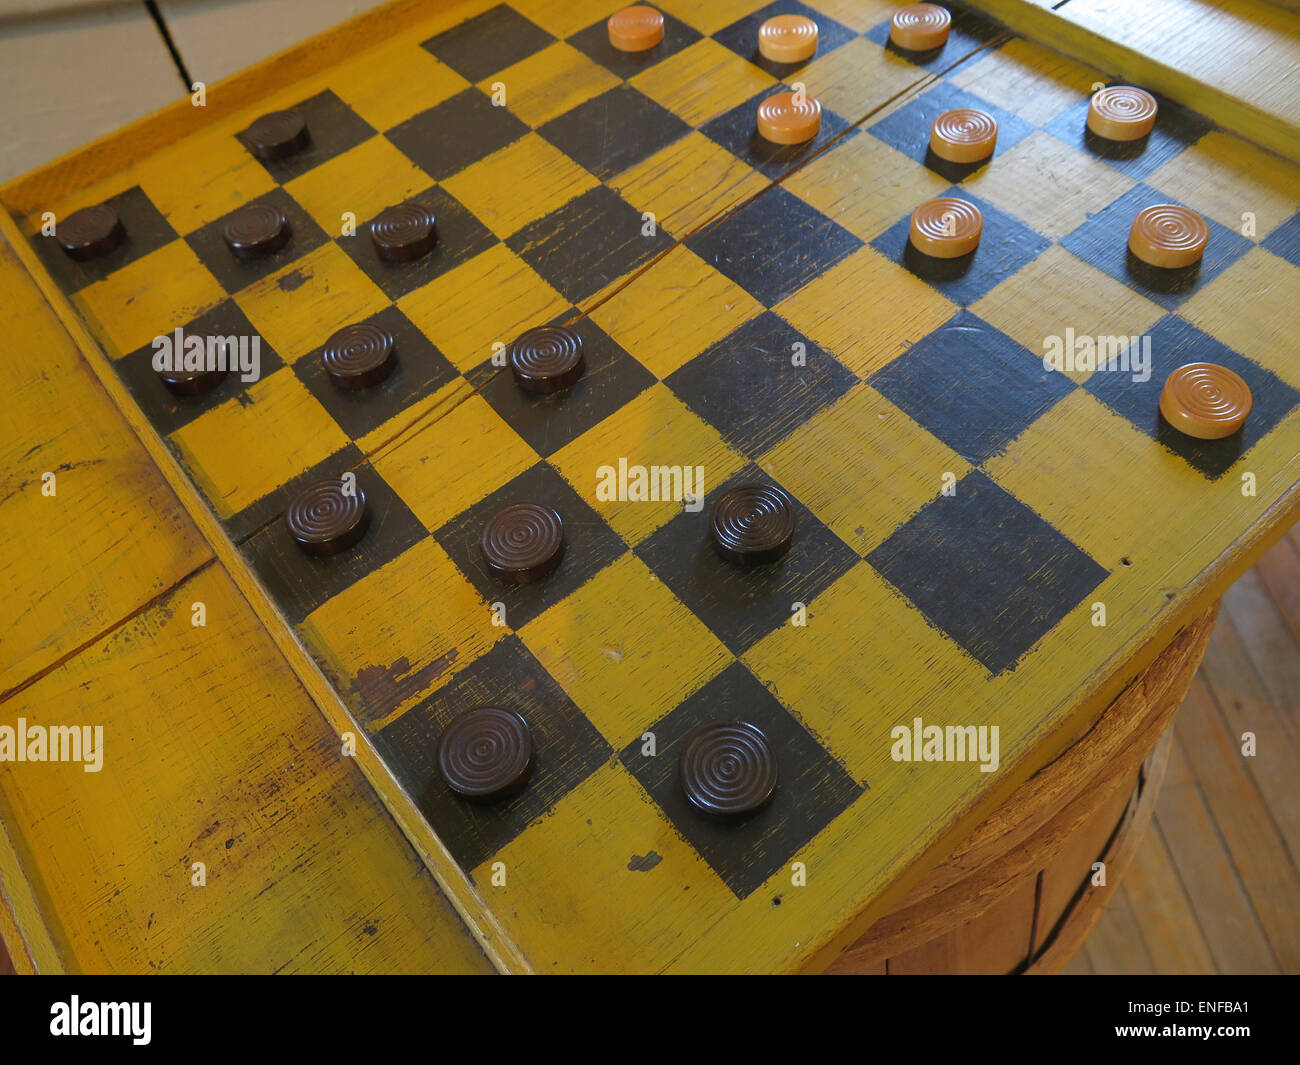 An antique checkers game is one of the toys on display at the Bennington Museum in Bennington, Vermont. Stock Photo